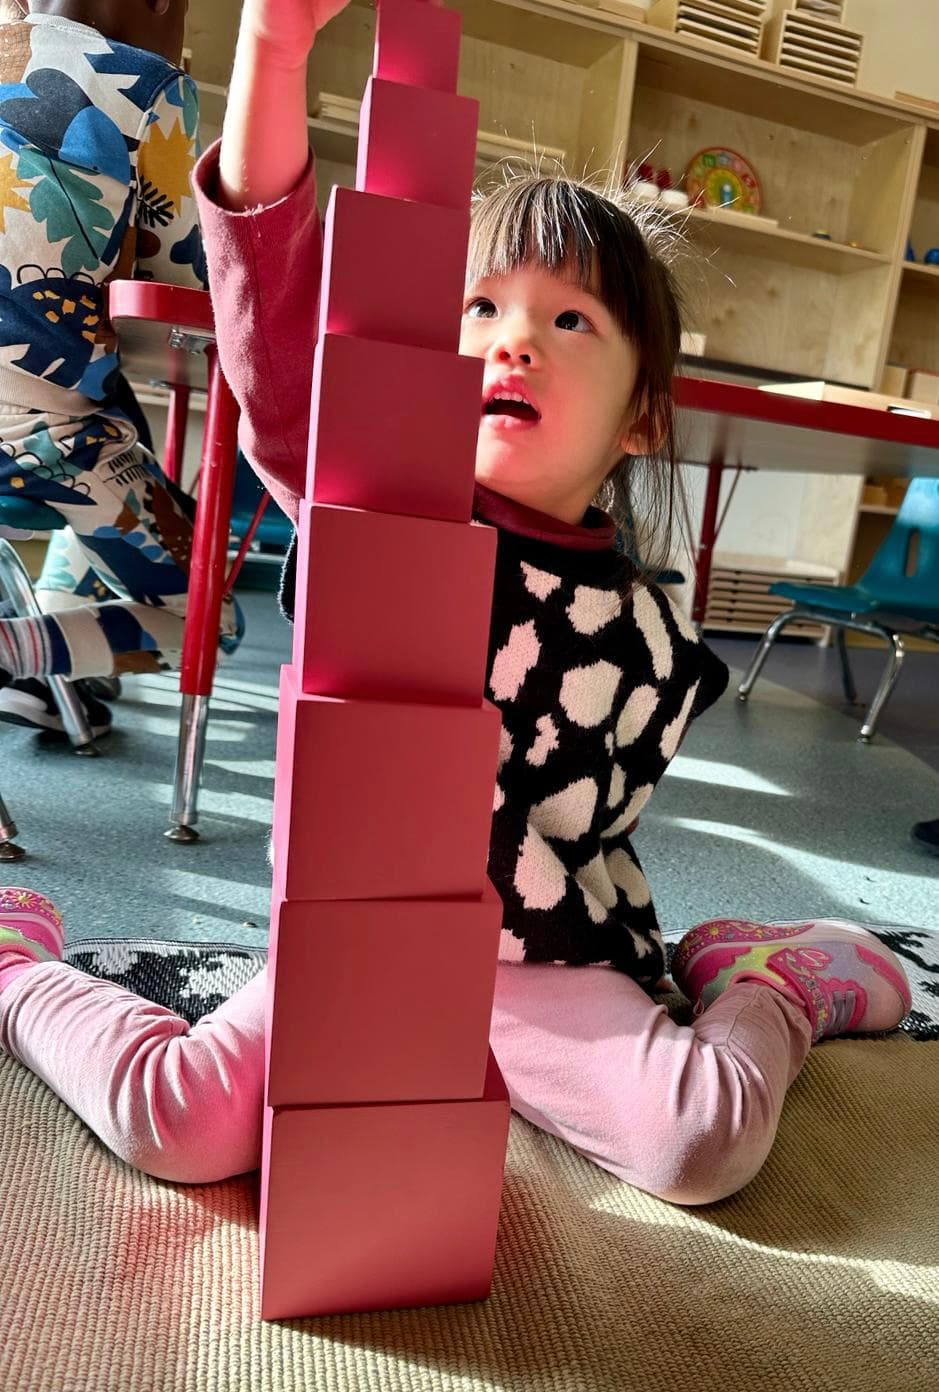 A girl excitedly creating a tall structure of stacked red cylinders.